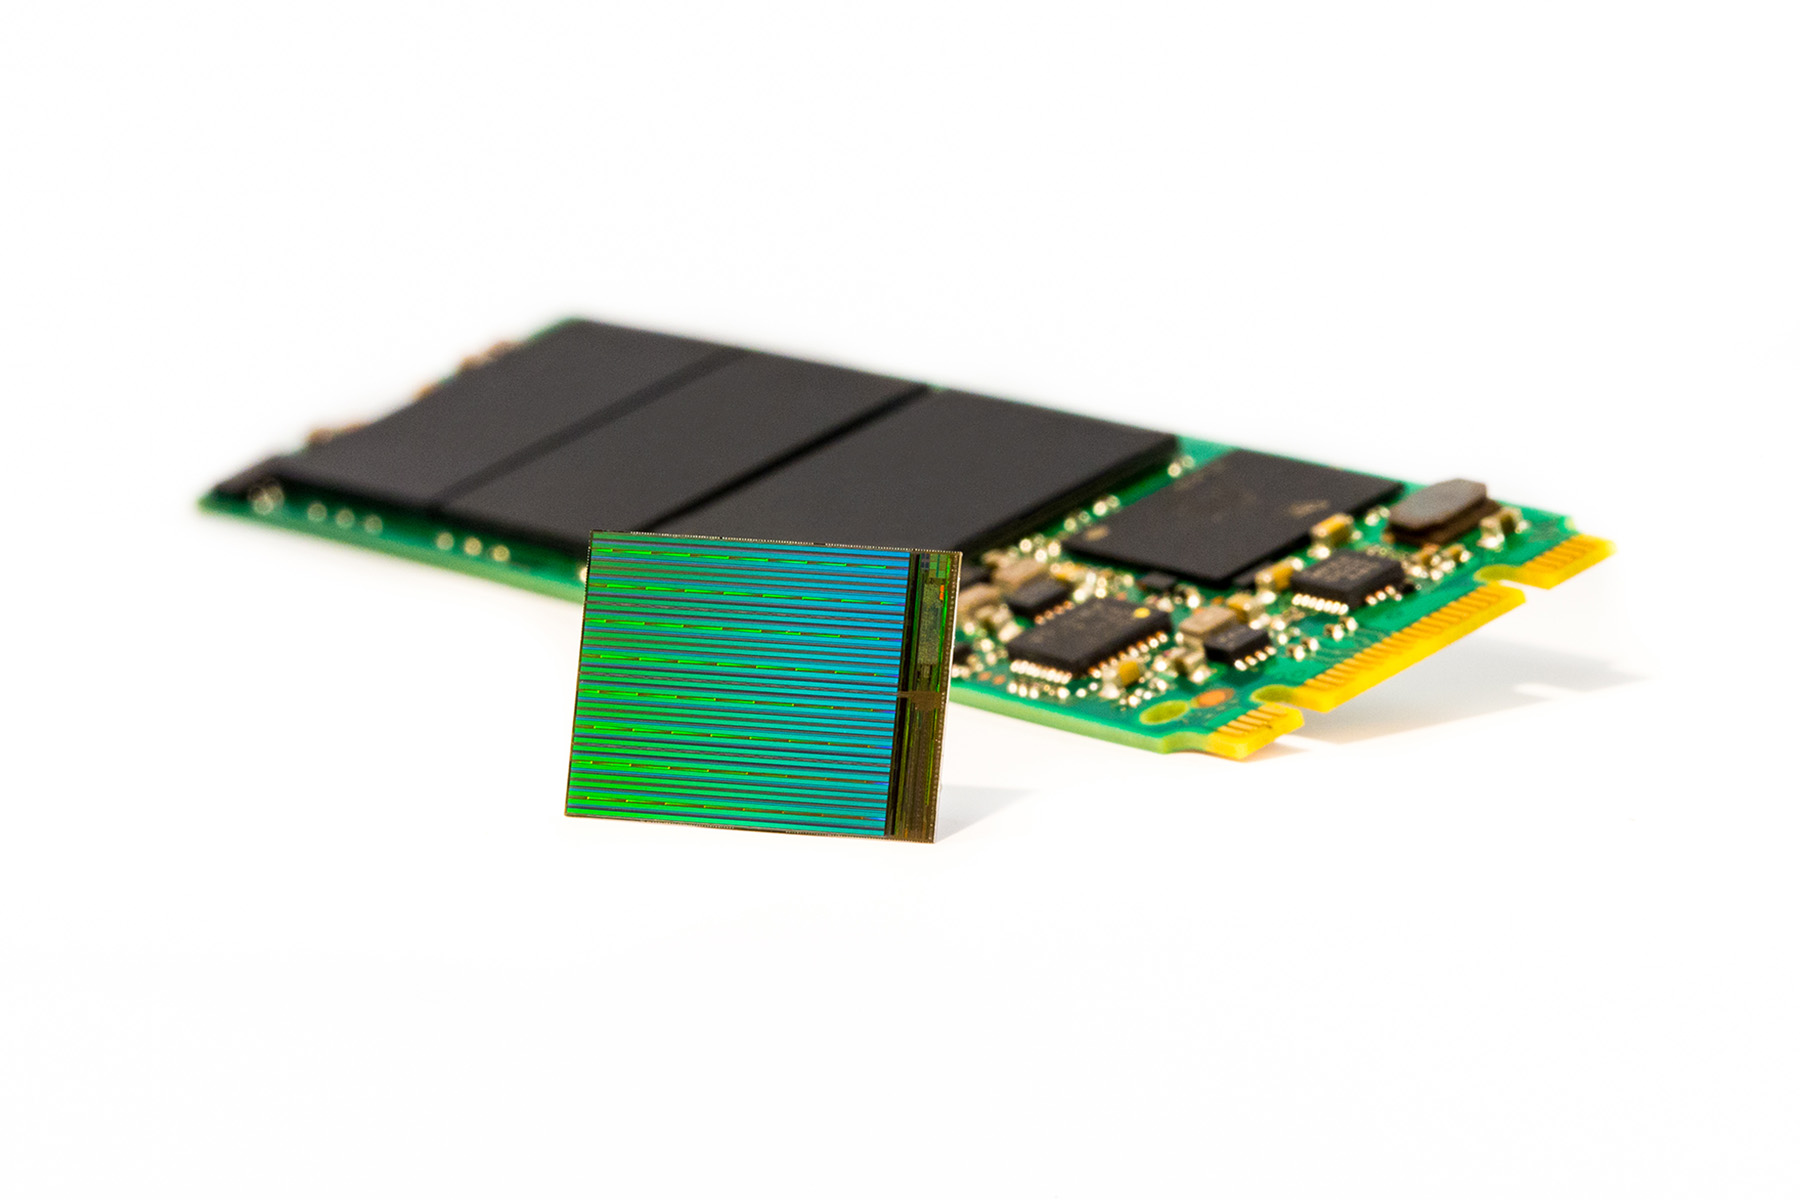 Media asset in full size related to 3dfxzone.it news item entitled as follows: Intel e Micron promettono SSD meno costosi con i chip 3D NAND | Image Name: news22397_Intel-Micron-3D-DIE-M2-SSD_1.jpg